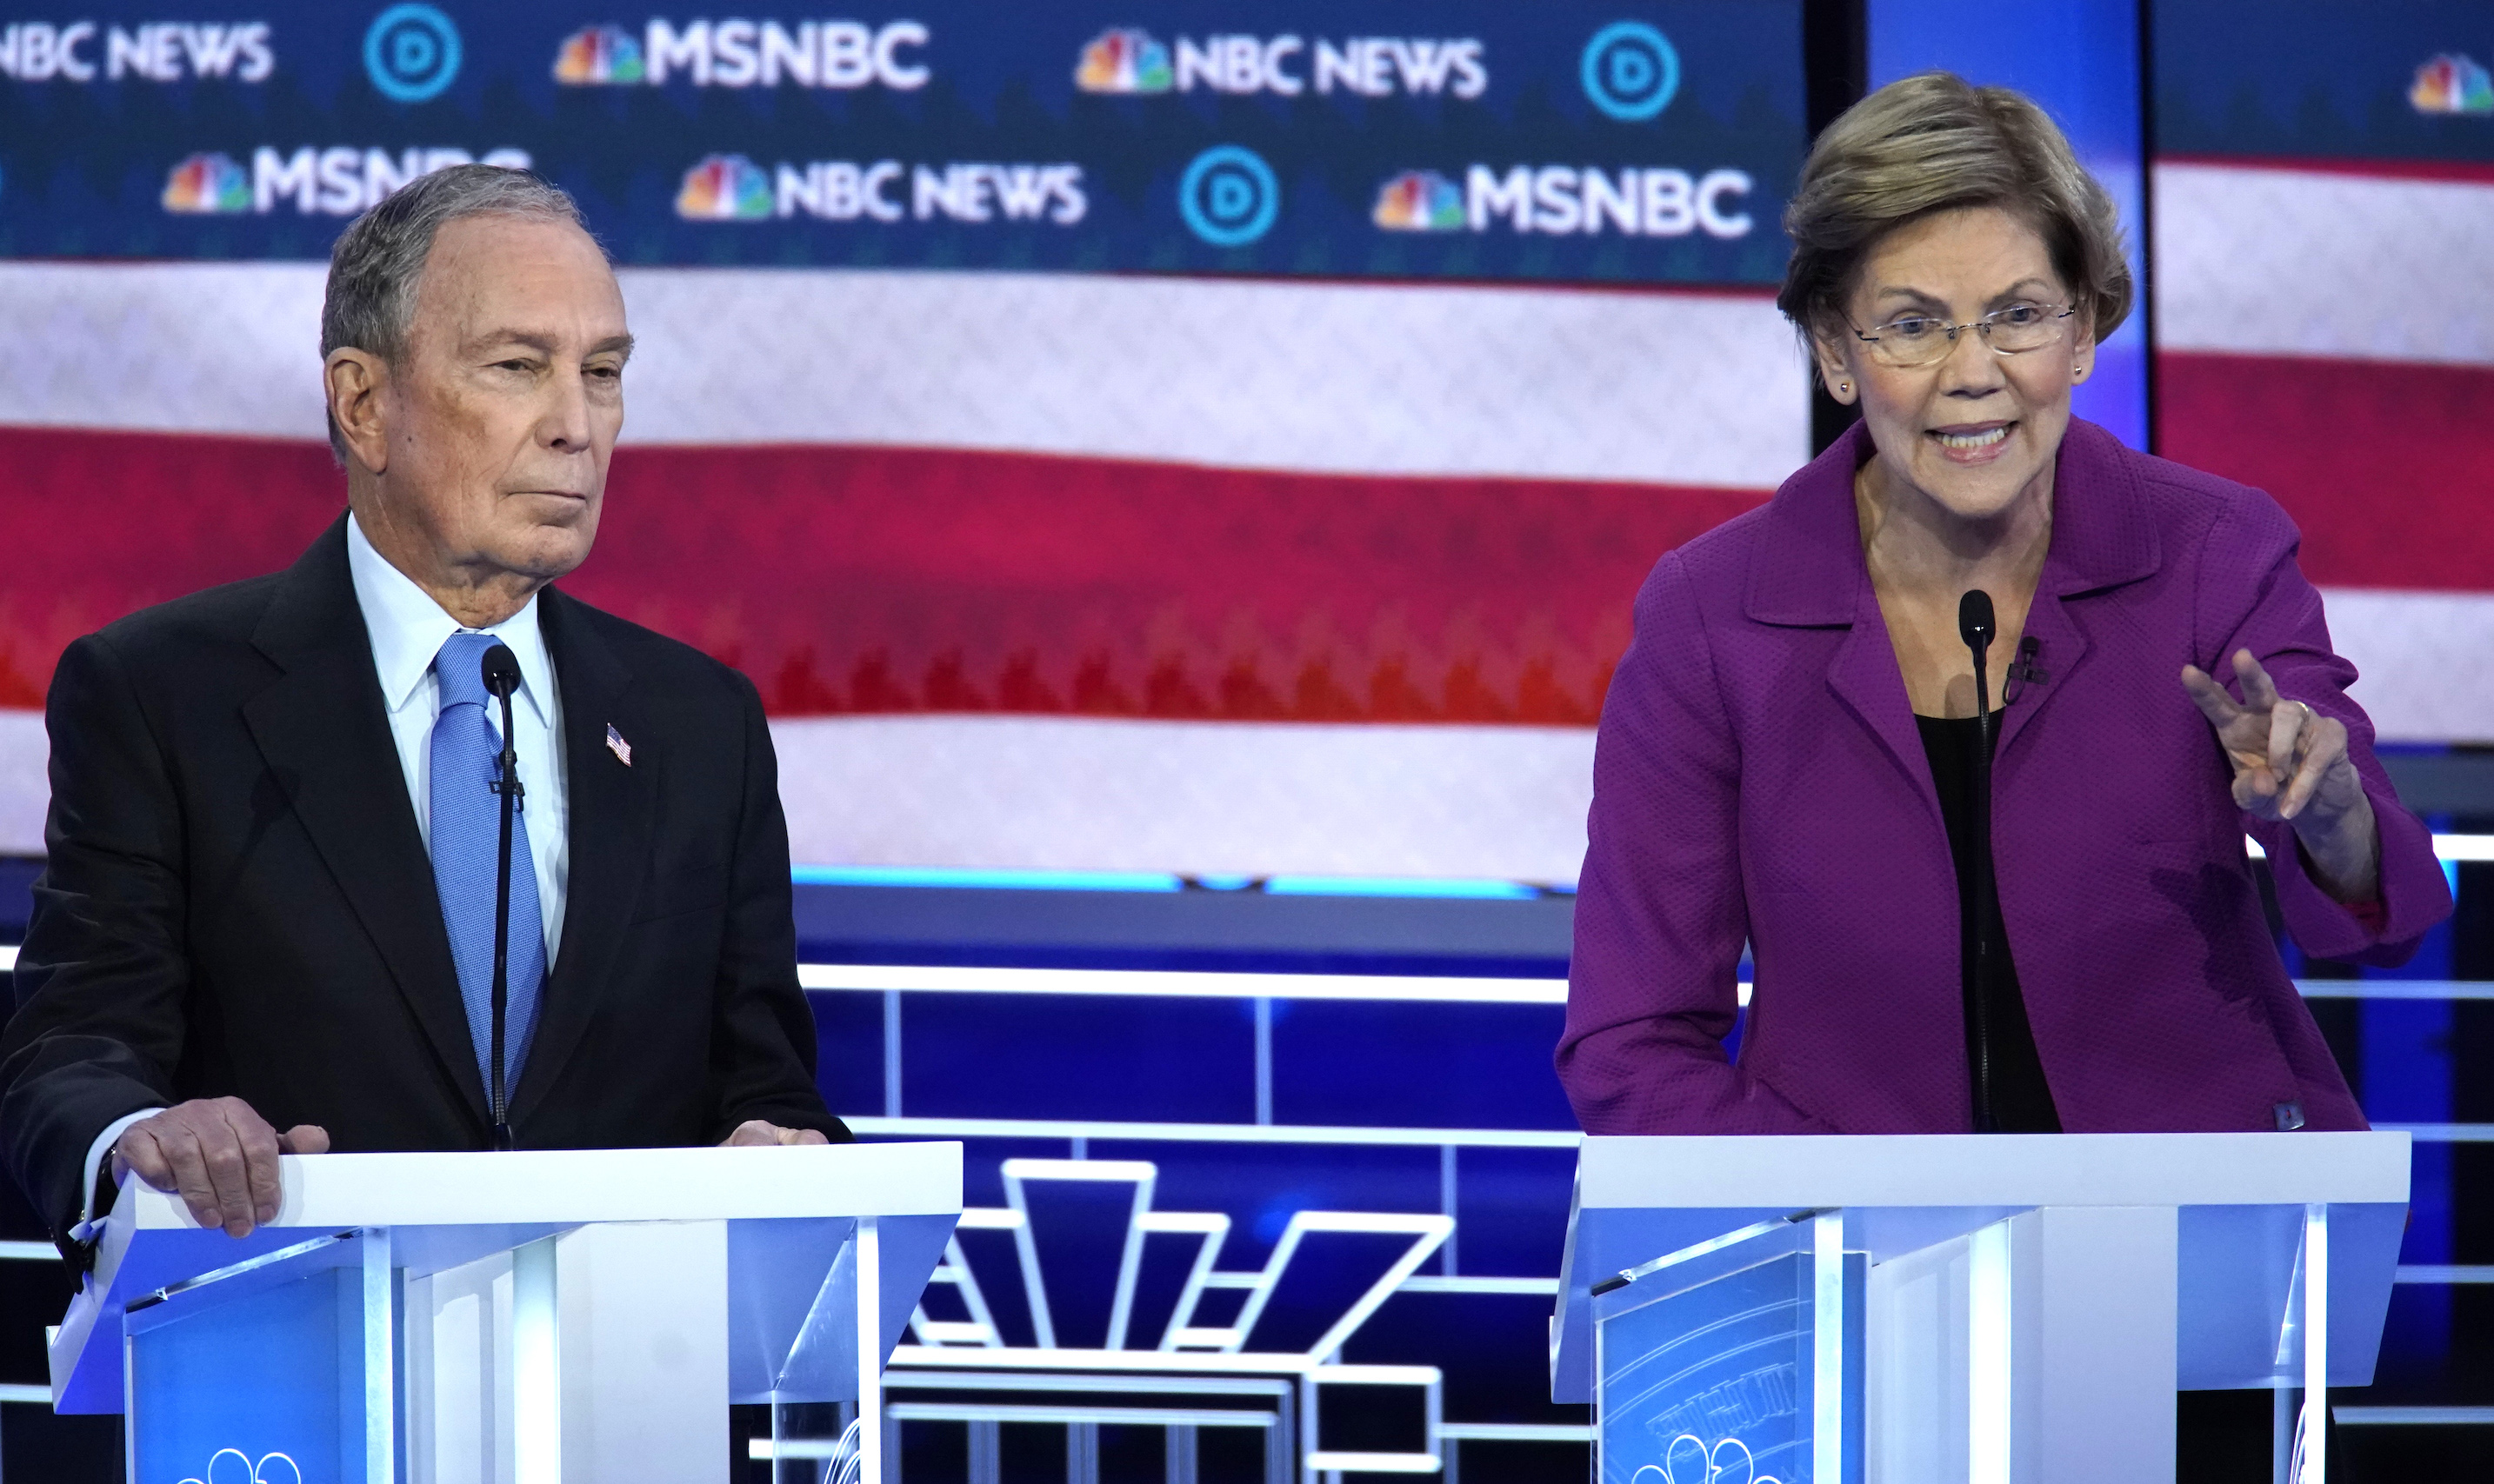 The benefits of a knives-out Democratic debate